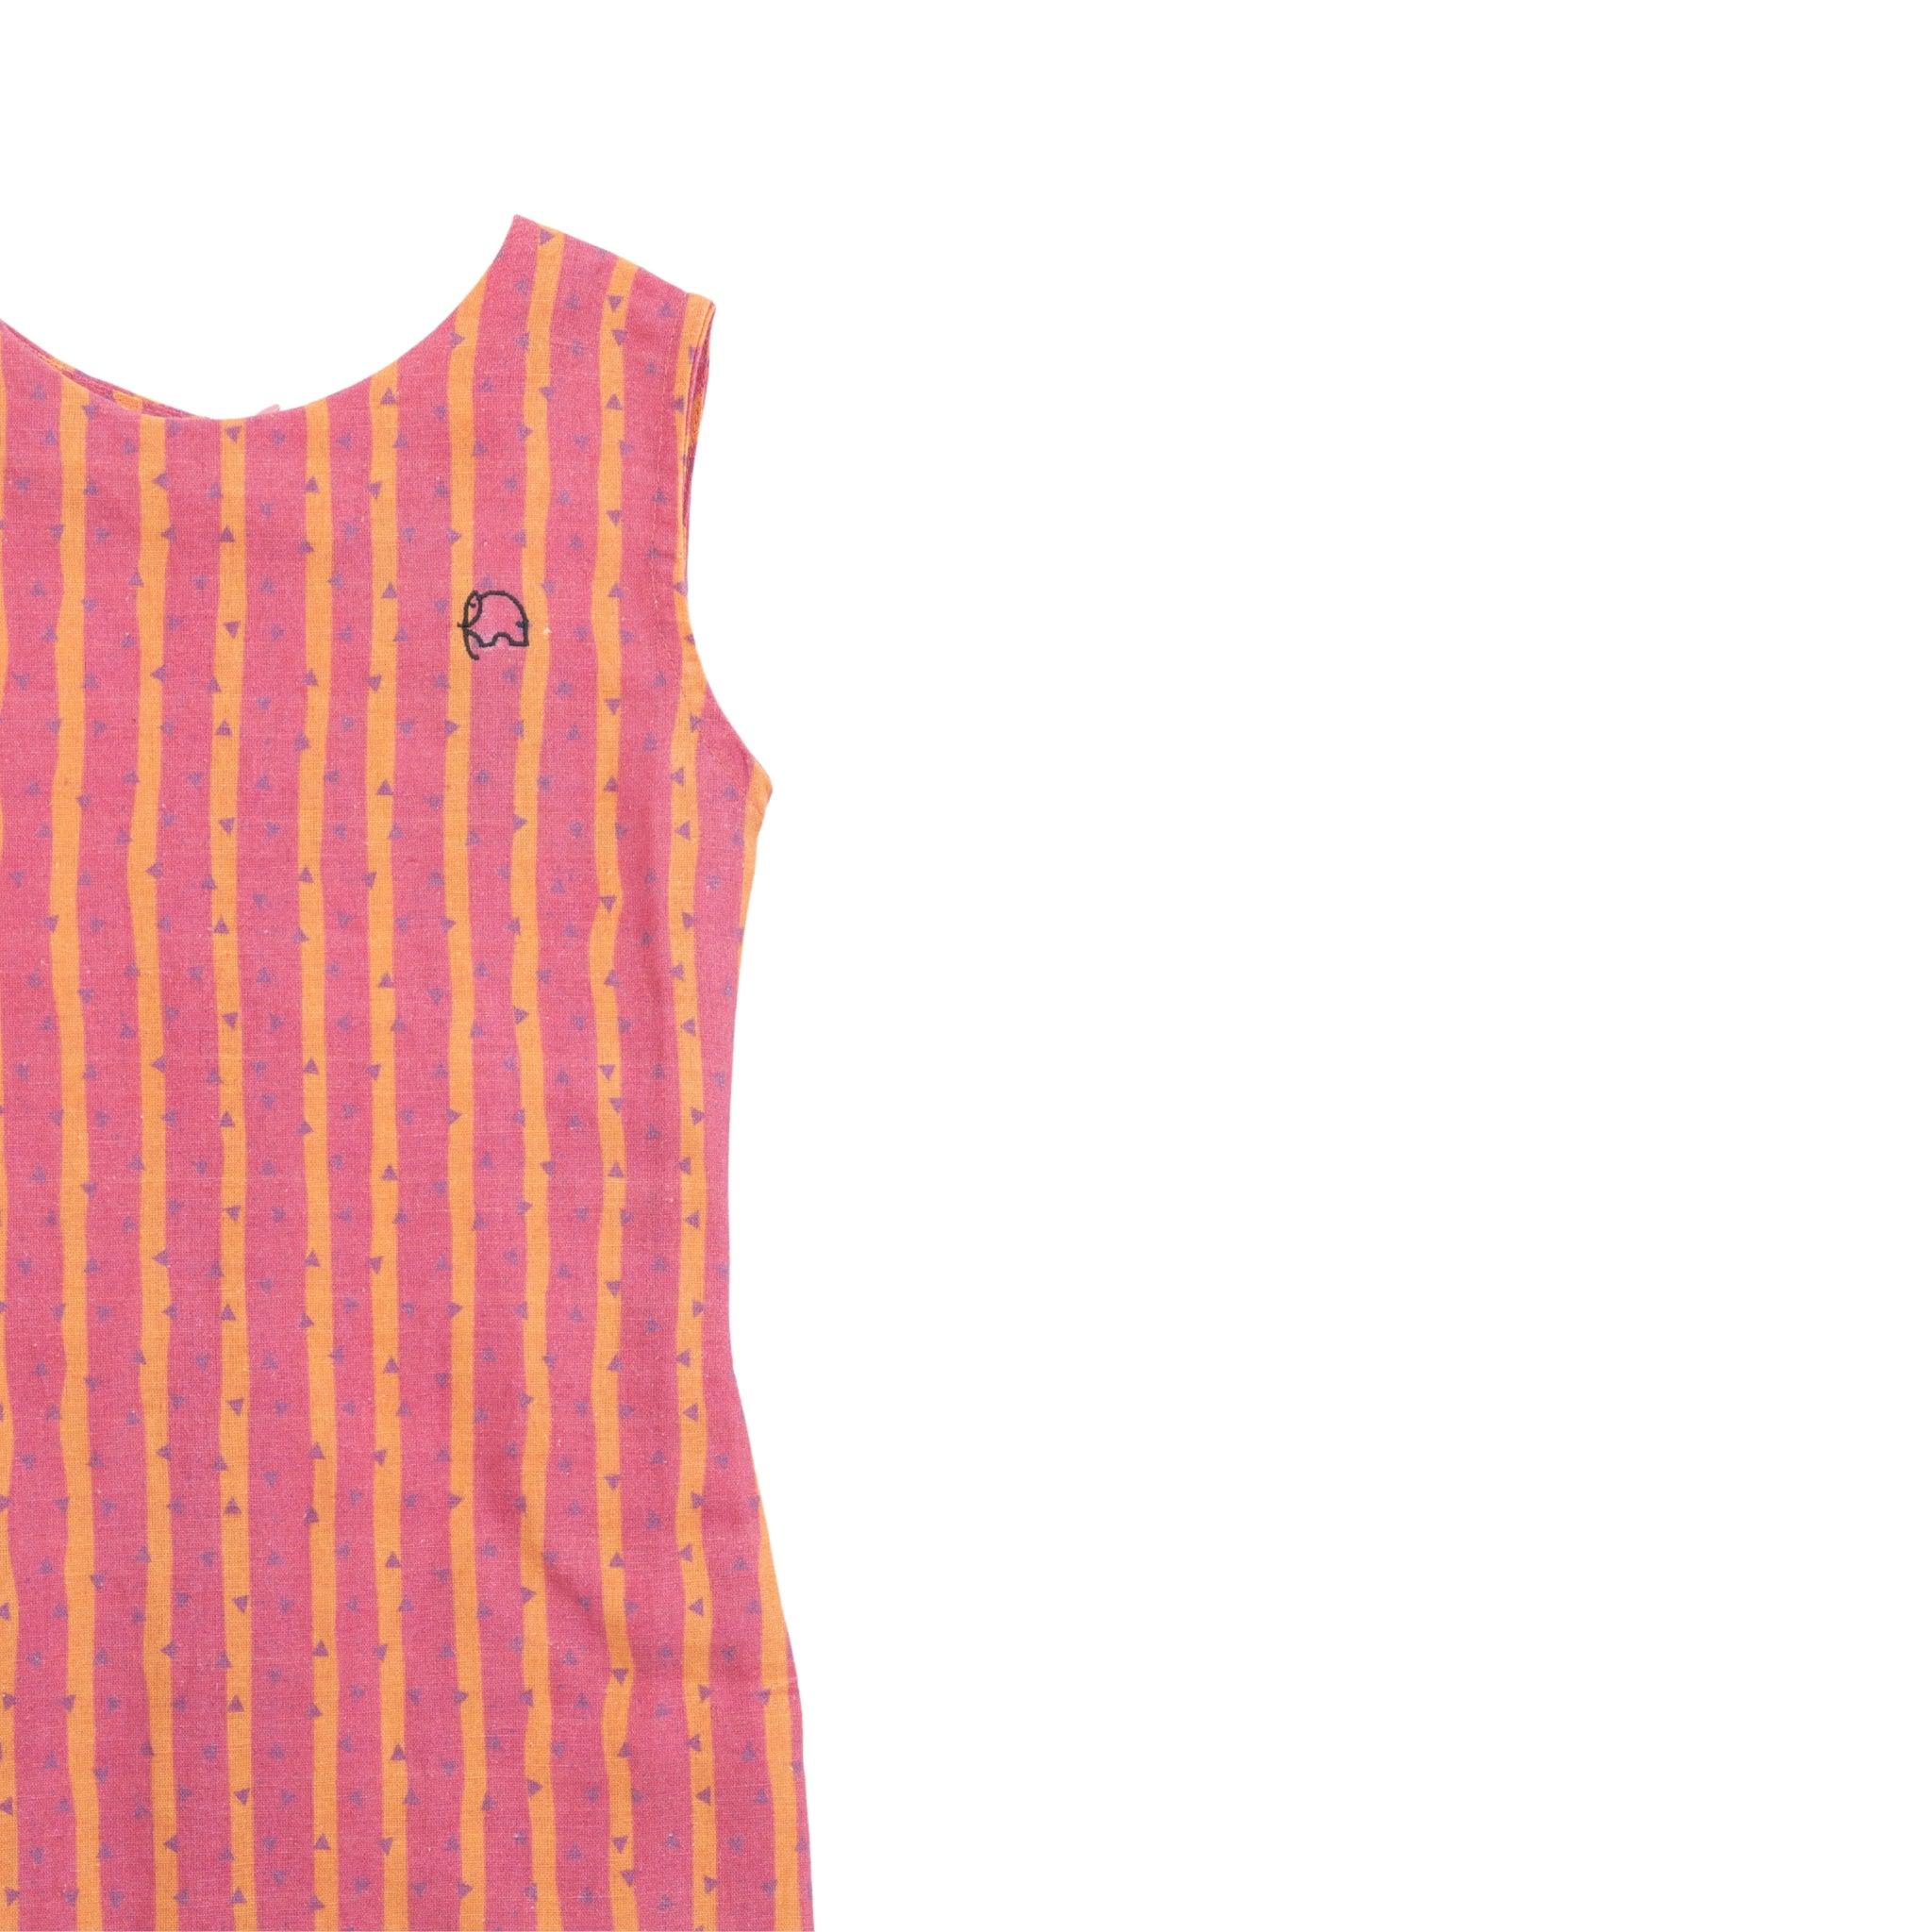 A Karee Linen Cotton Round Neck Frock for Kids in Lilac Rose.